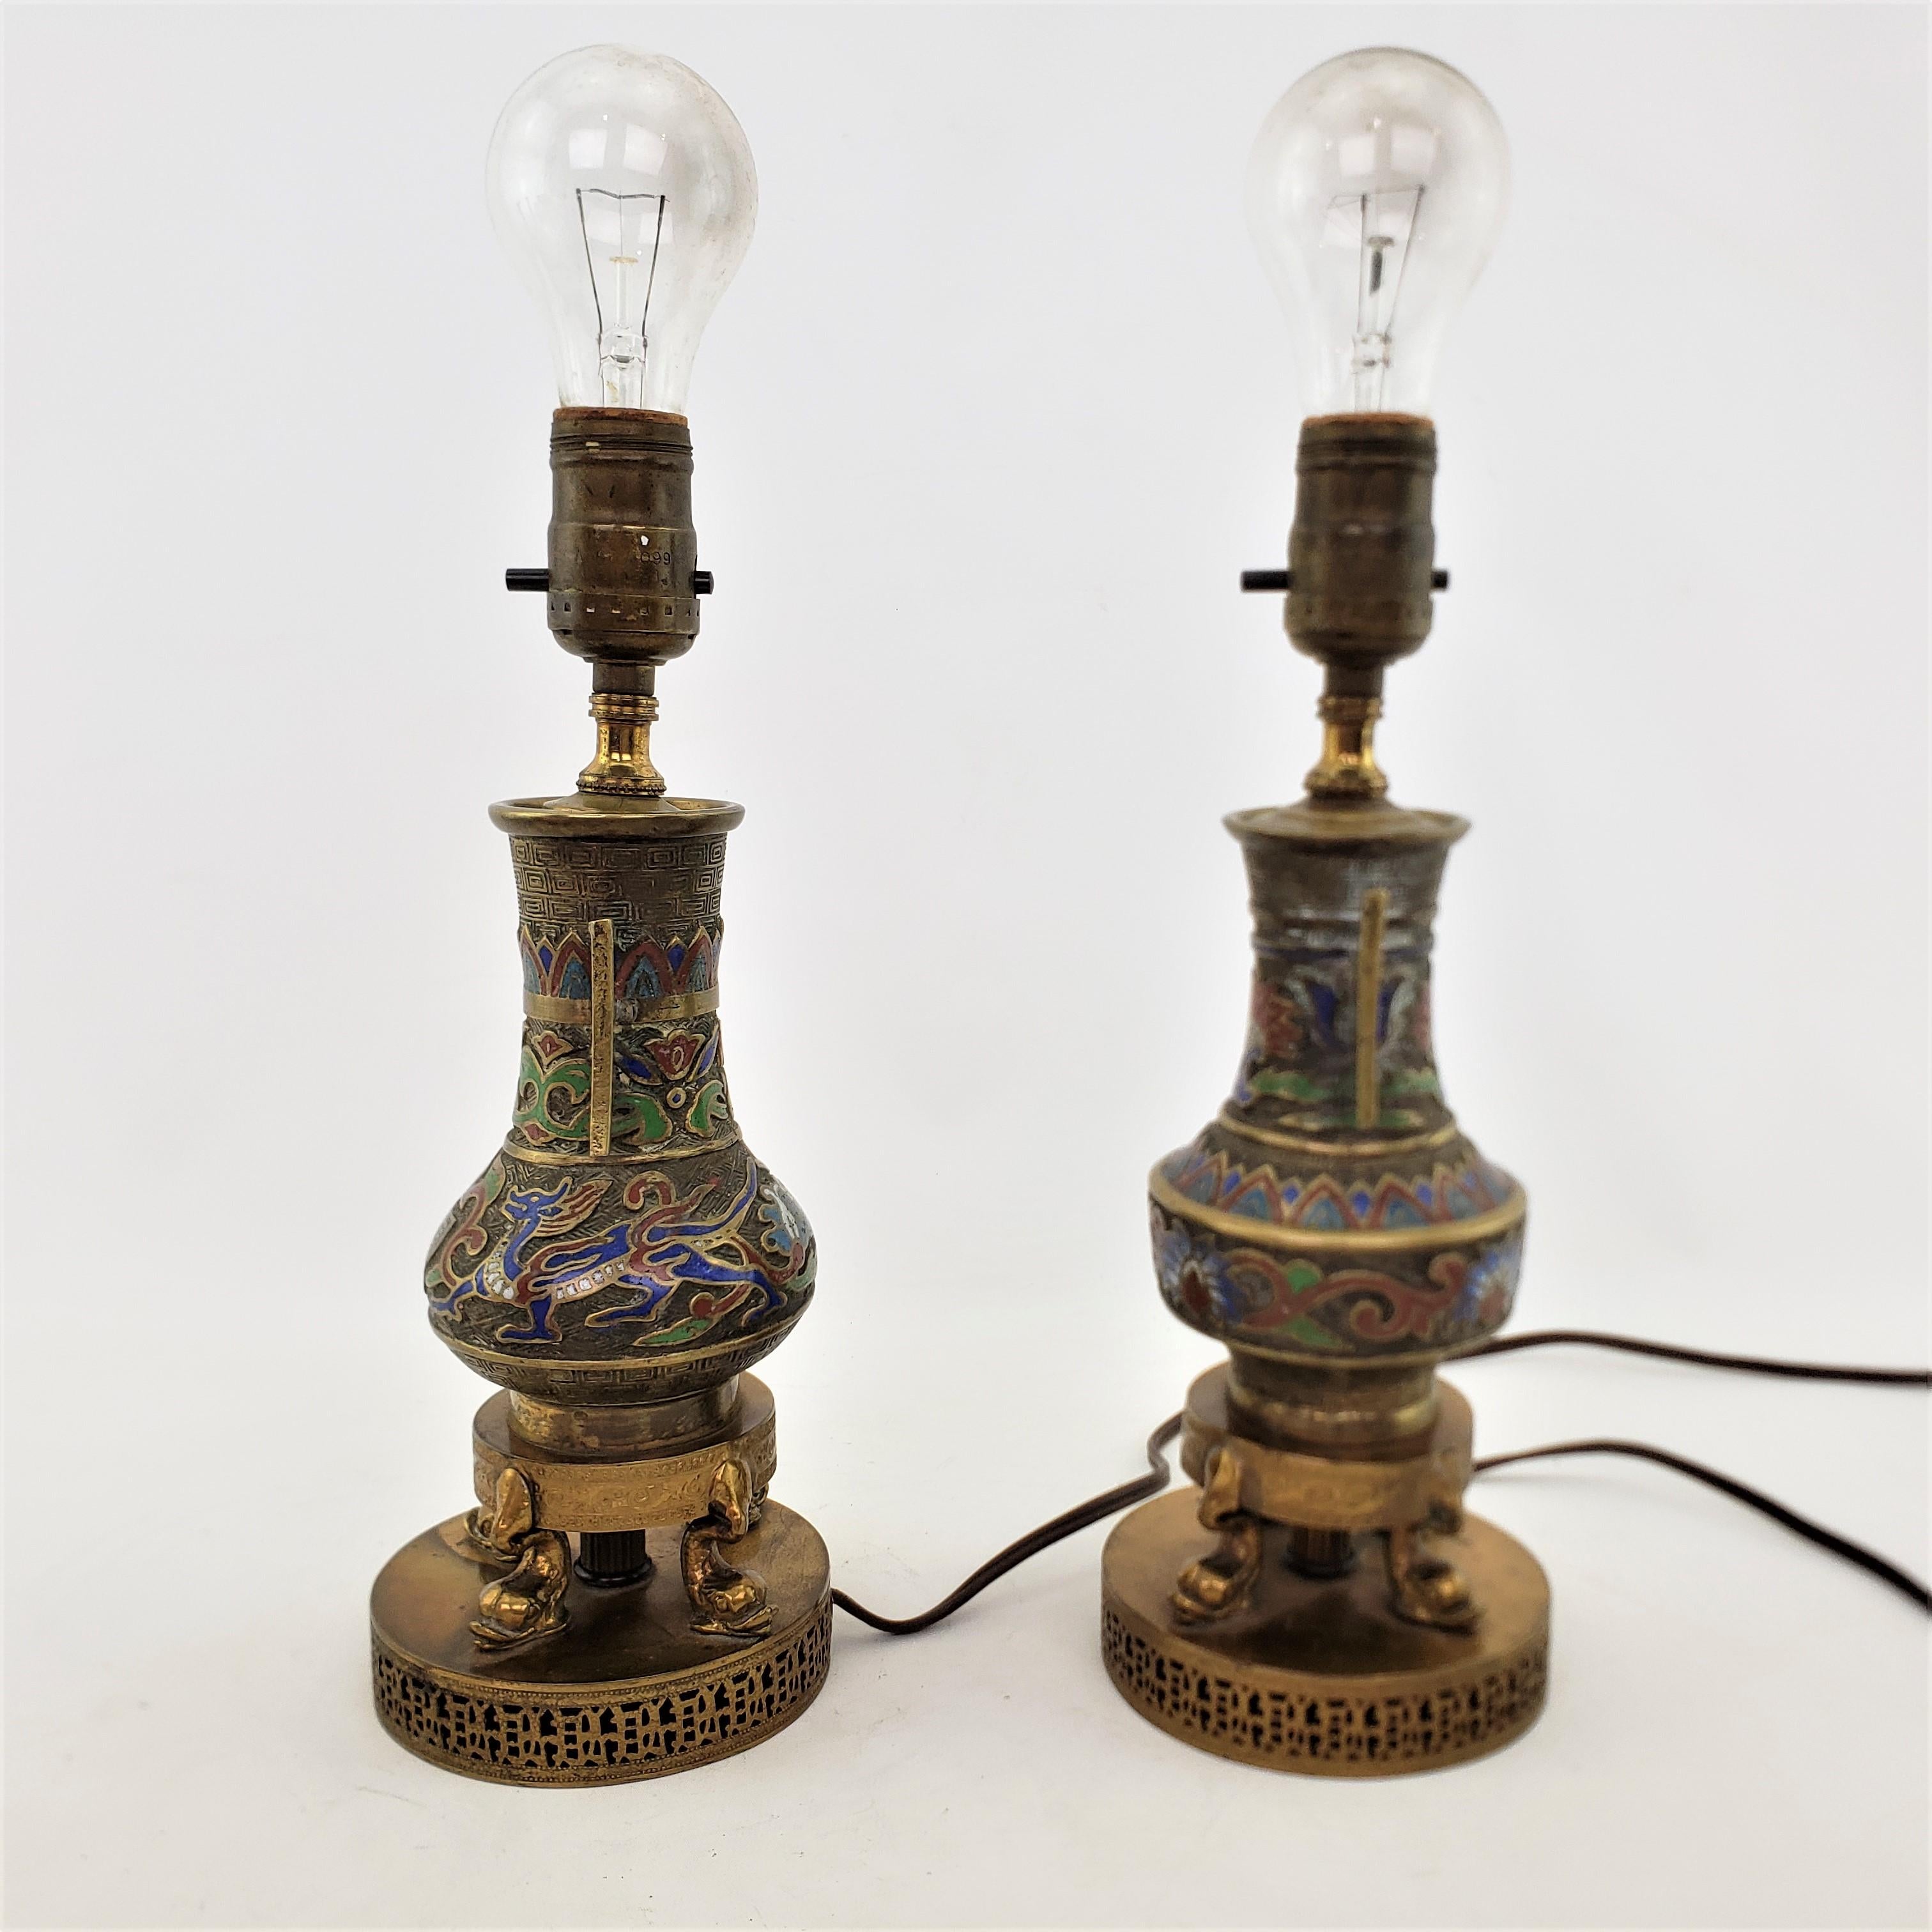 Pair of Antique Japanese Cloisonne Accent or Boudoir Table Lamps In Good Condition For Sale In Hamilton, Ontario